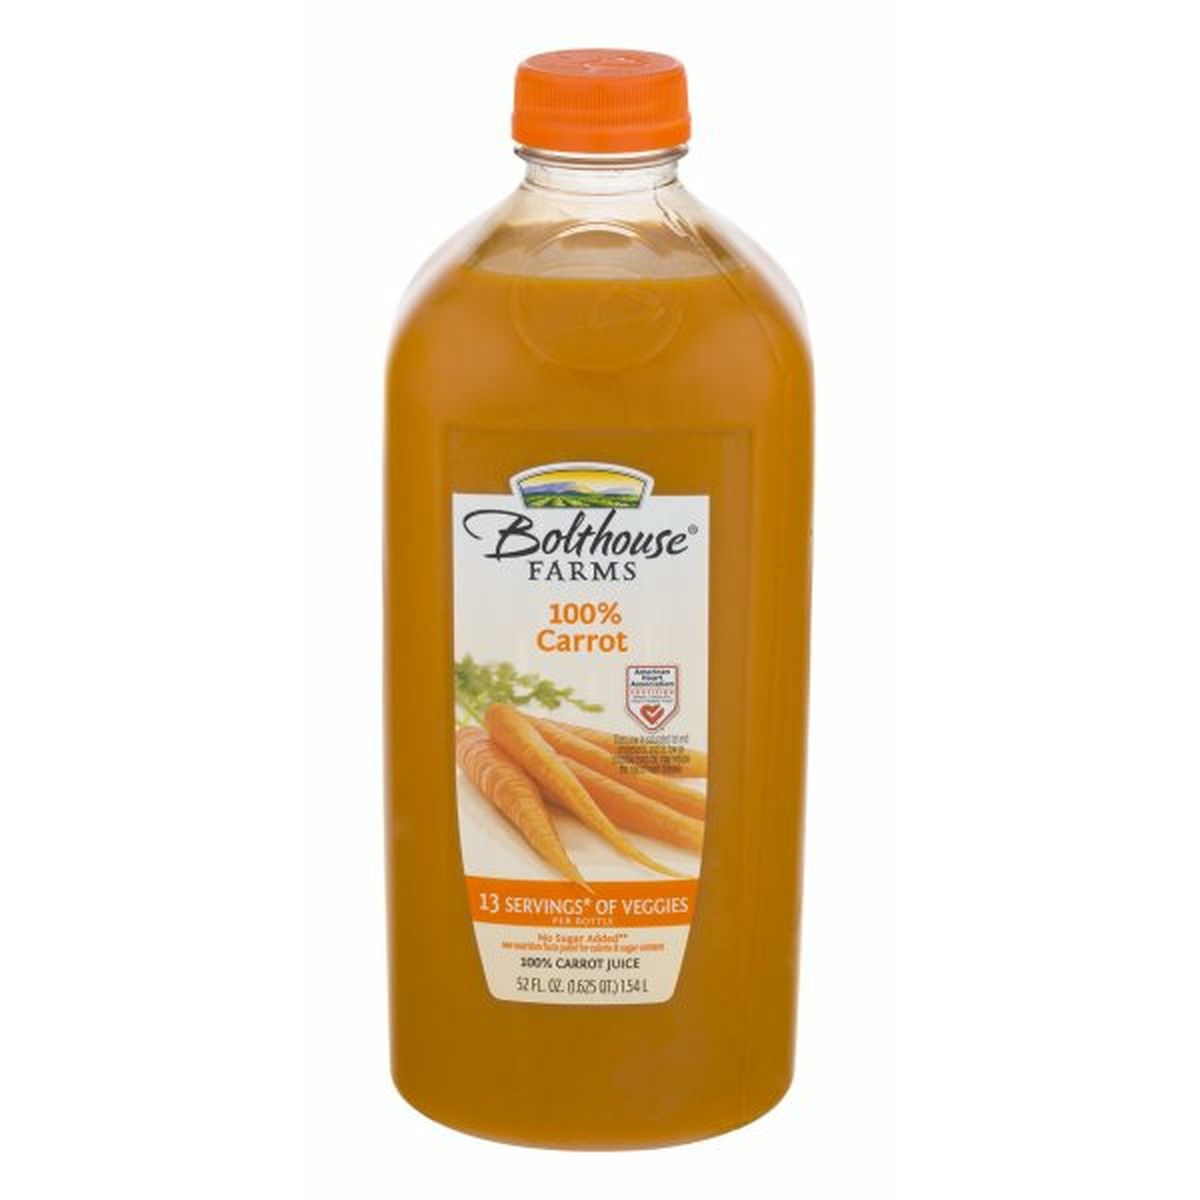 Calories in Bolthouse Farms 100% Carrot Juice